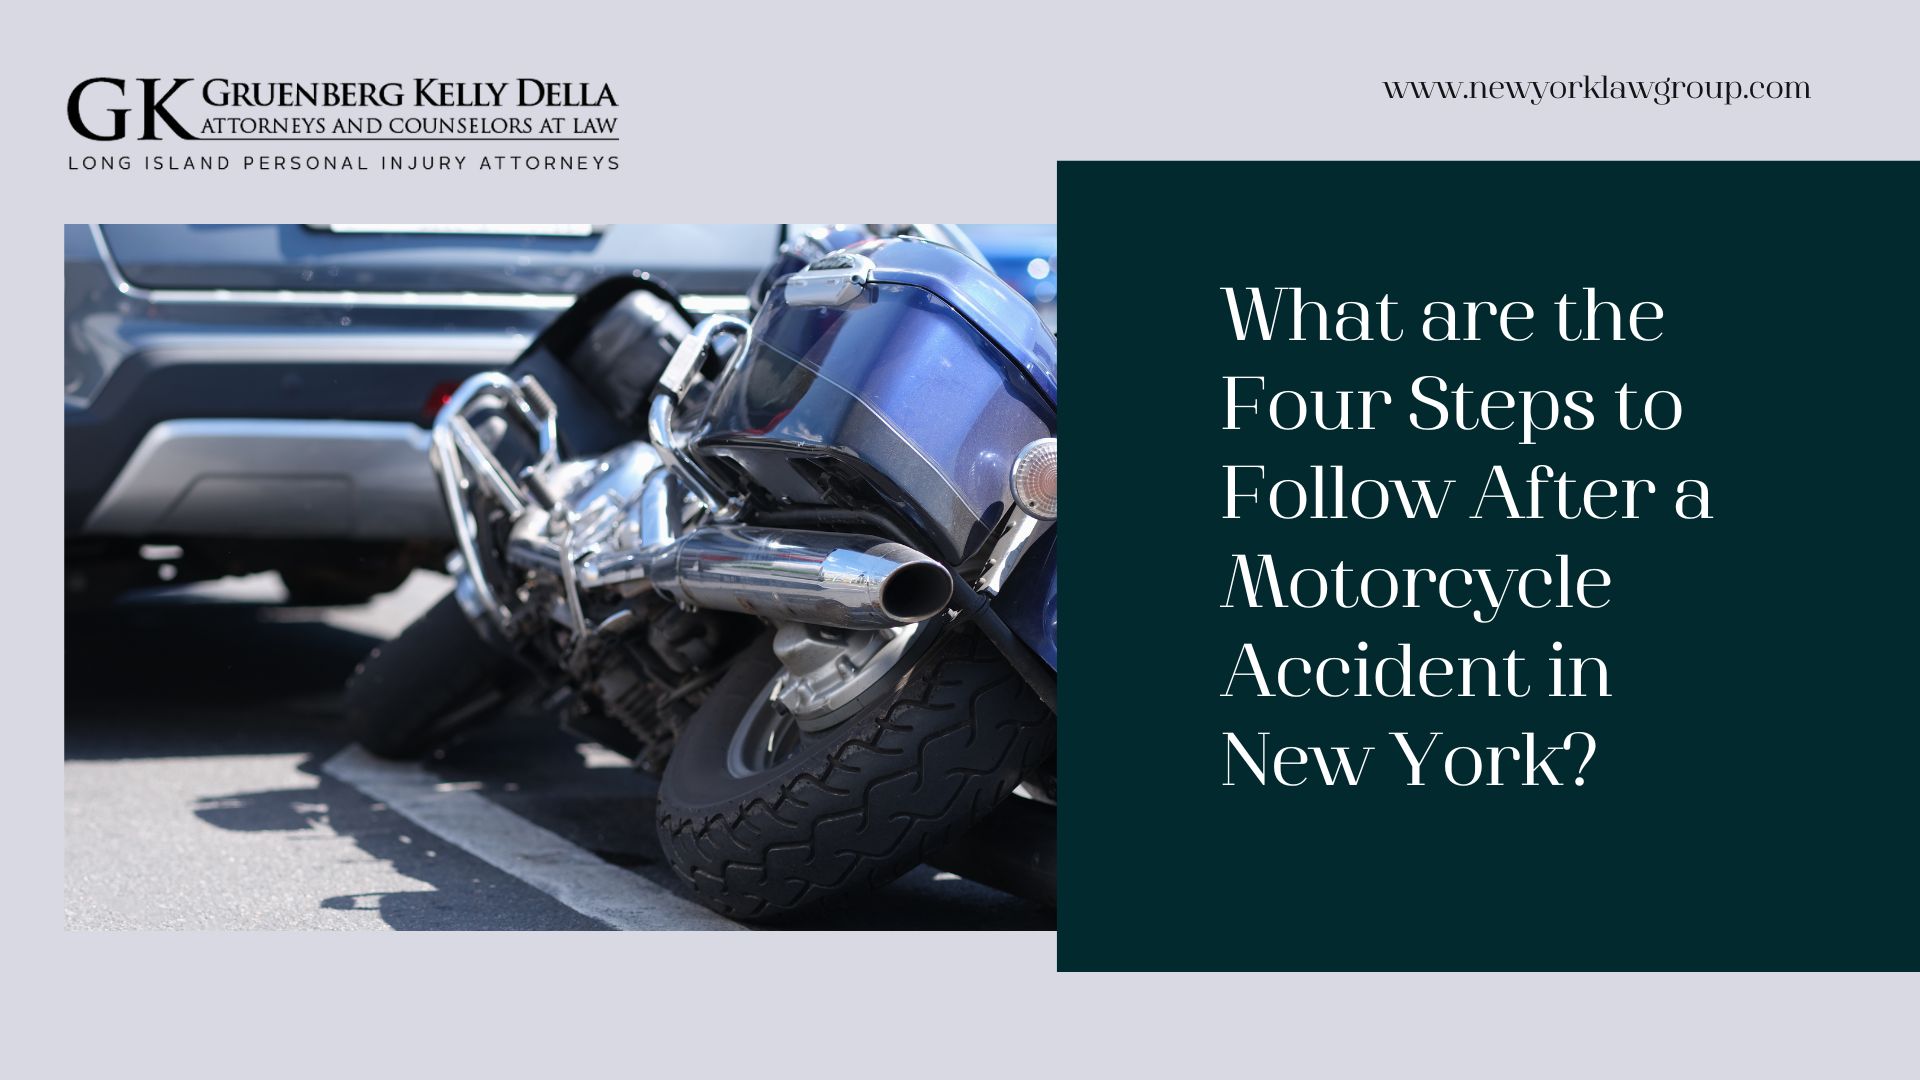 What are the Four Steps to Follow After a Motorcycle Accident in New York?